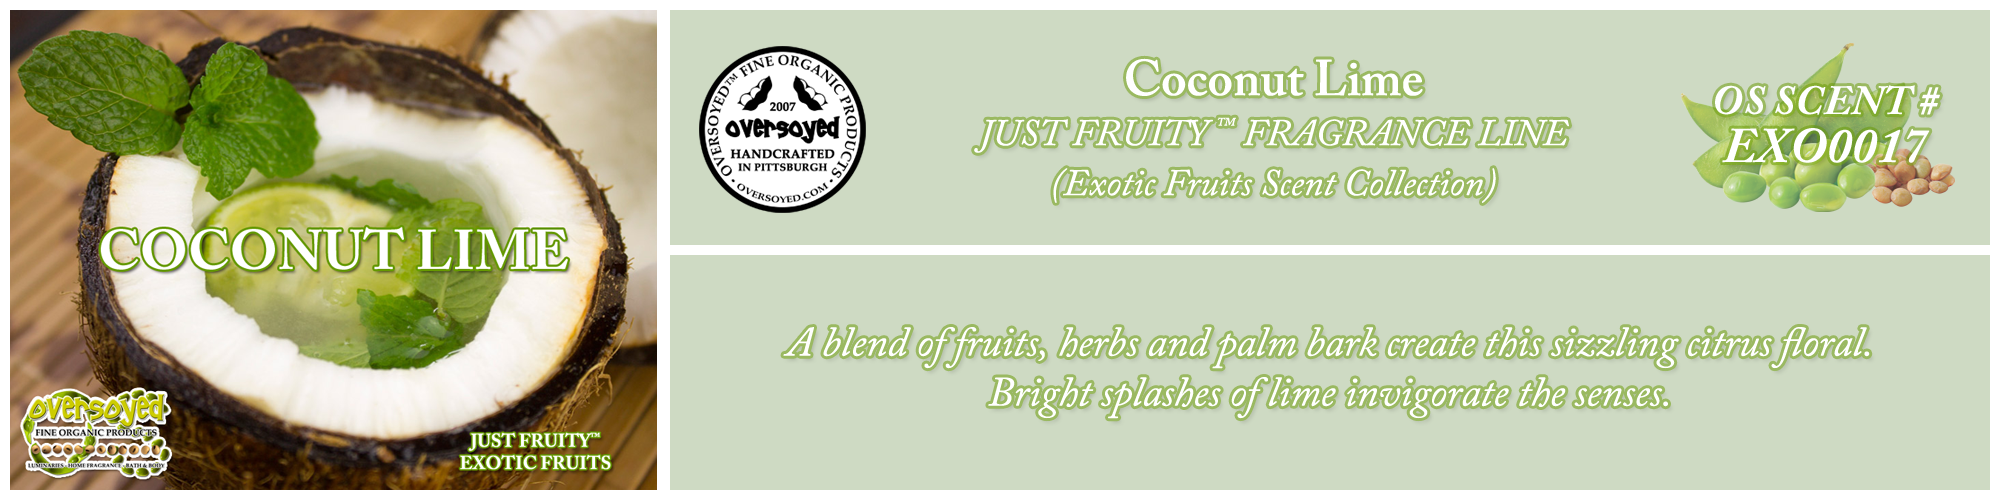 Coconut Lime Handcrafted Products Collection